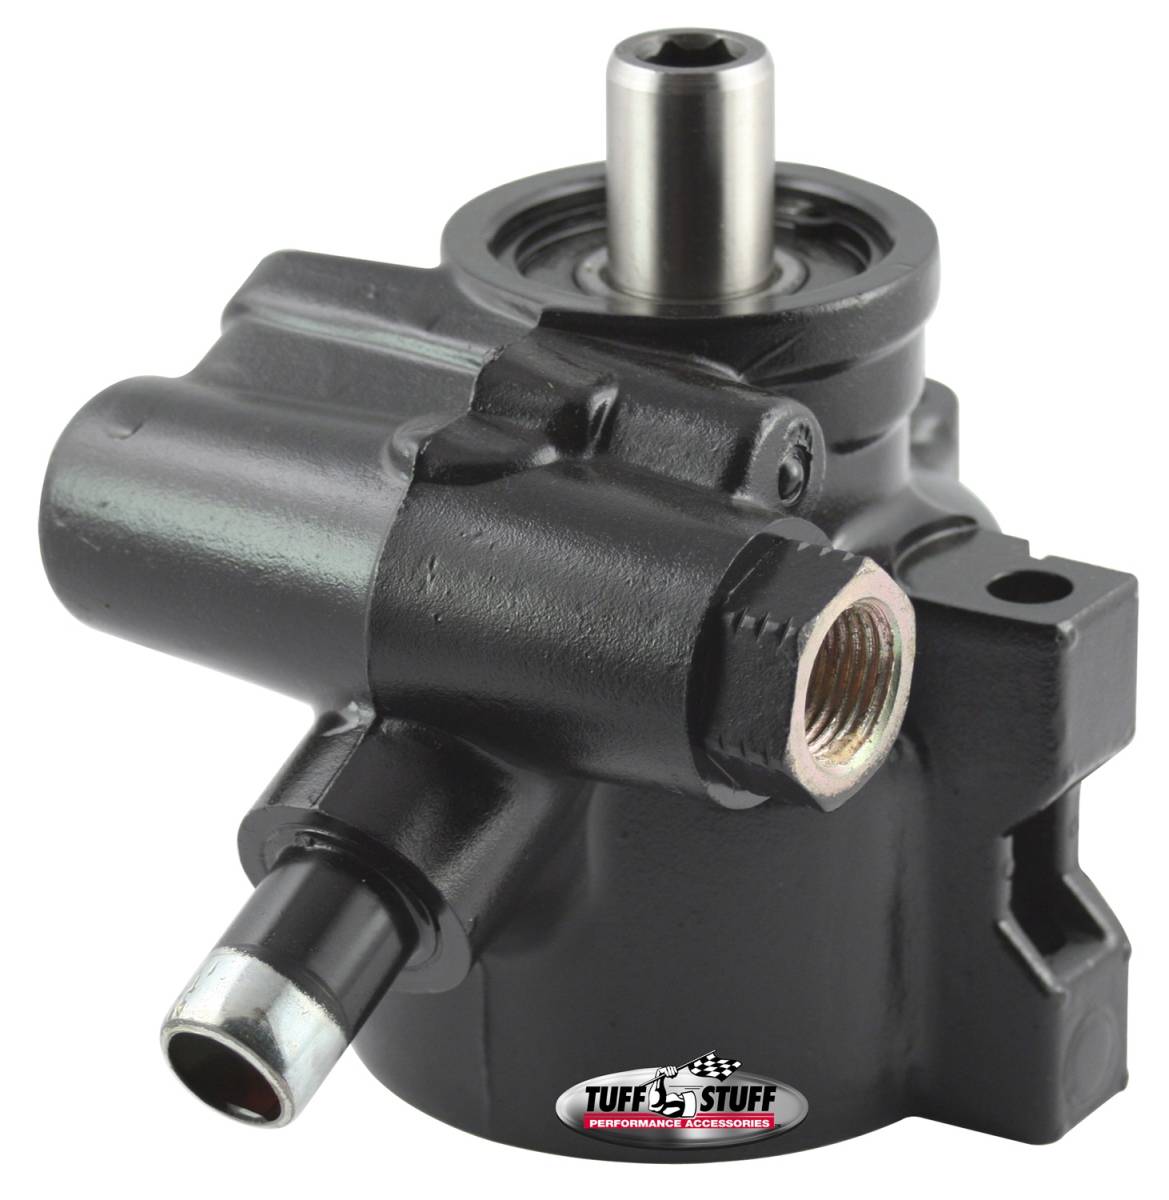 Tuff Stuff Performance - Type II Alum. Power Steering Pump M16 And 5/8 in. OD Return Tube 8mm Through Hole Mounting Aluminum For Street Rods/Custom Vehicles w/Limited Engine Space Black 6175ALB-3